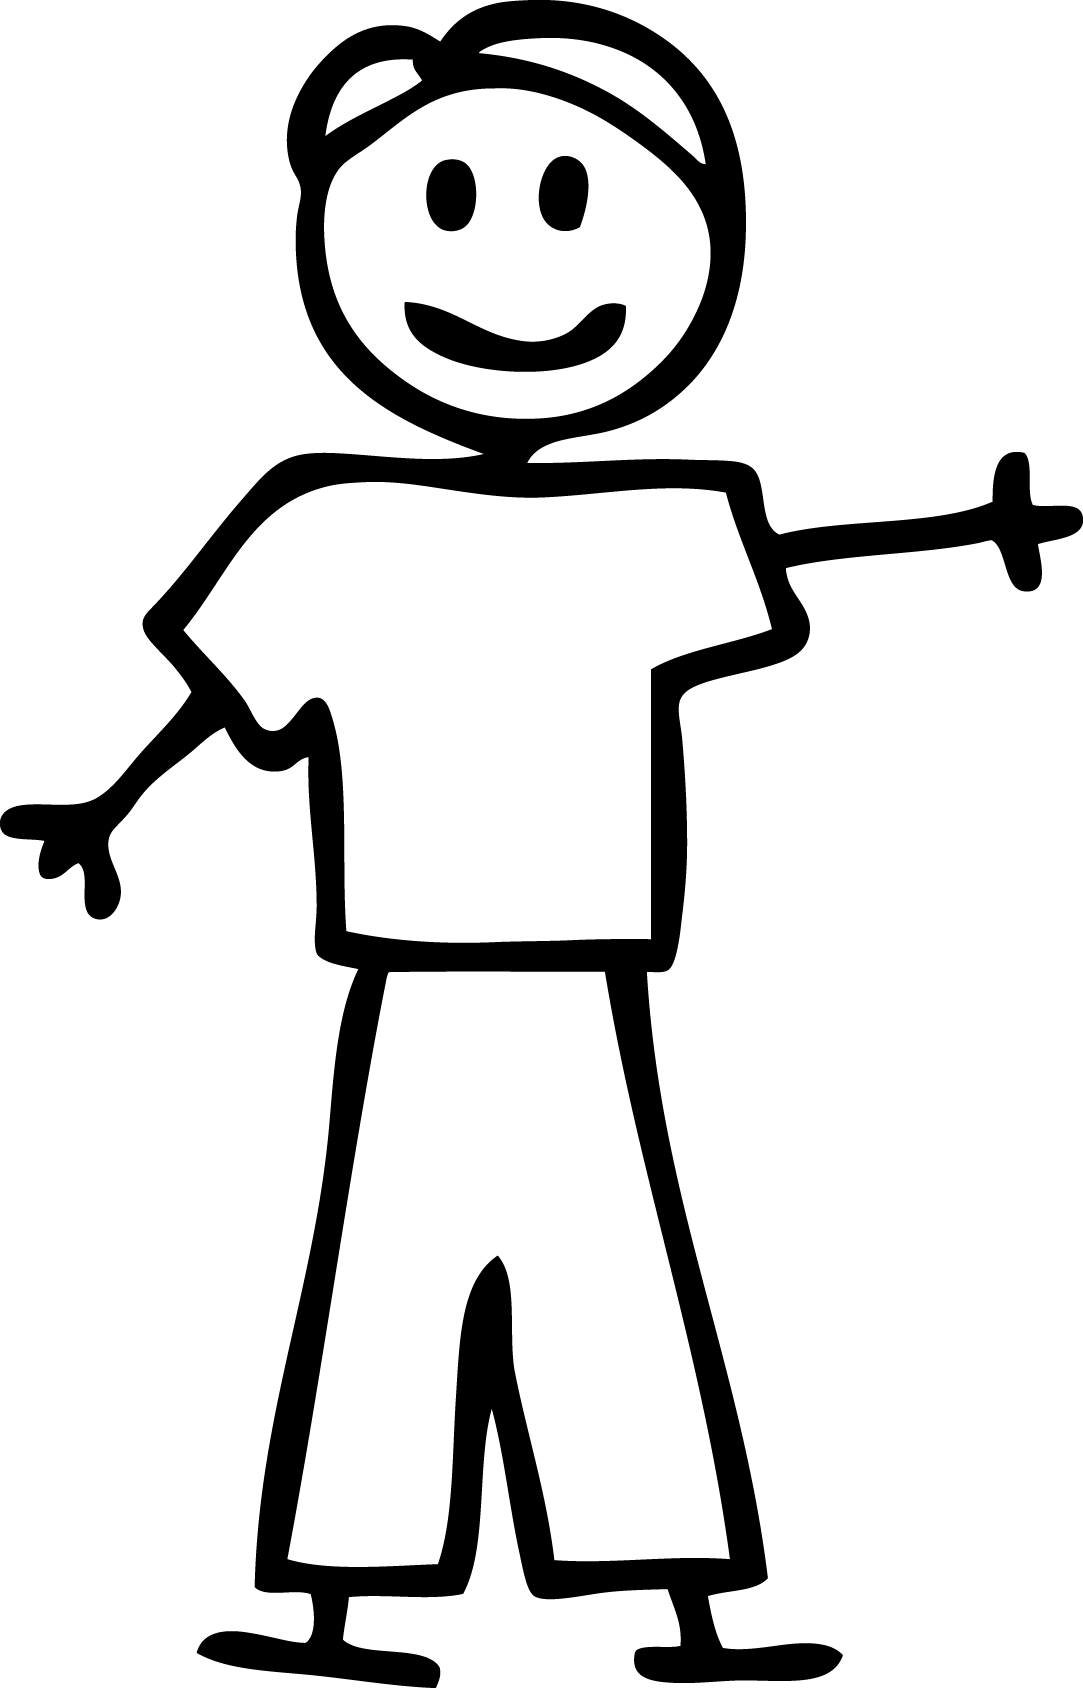 Free Stick People, Download Free Stick People png image, Free ClipArts on Clipart Library